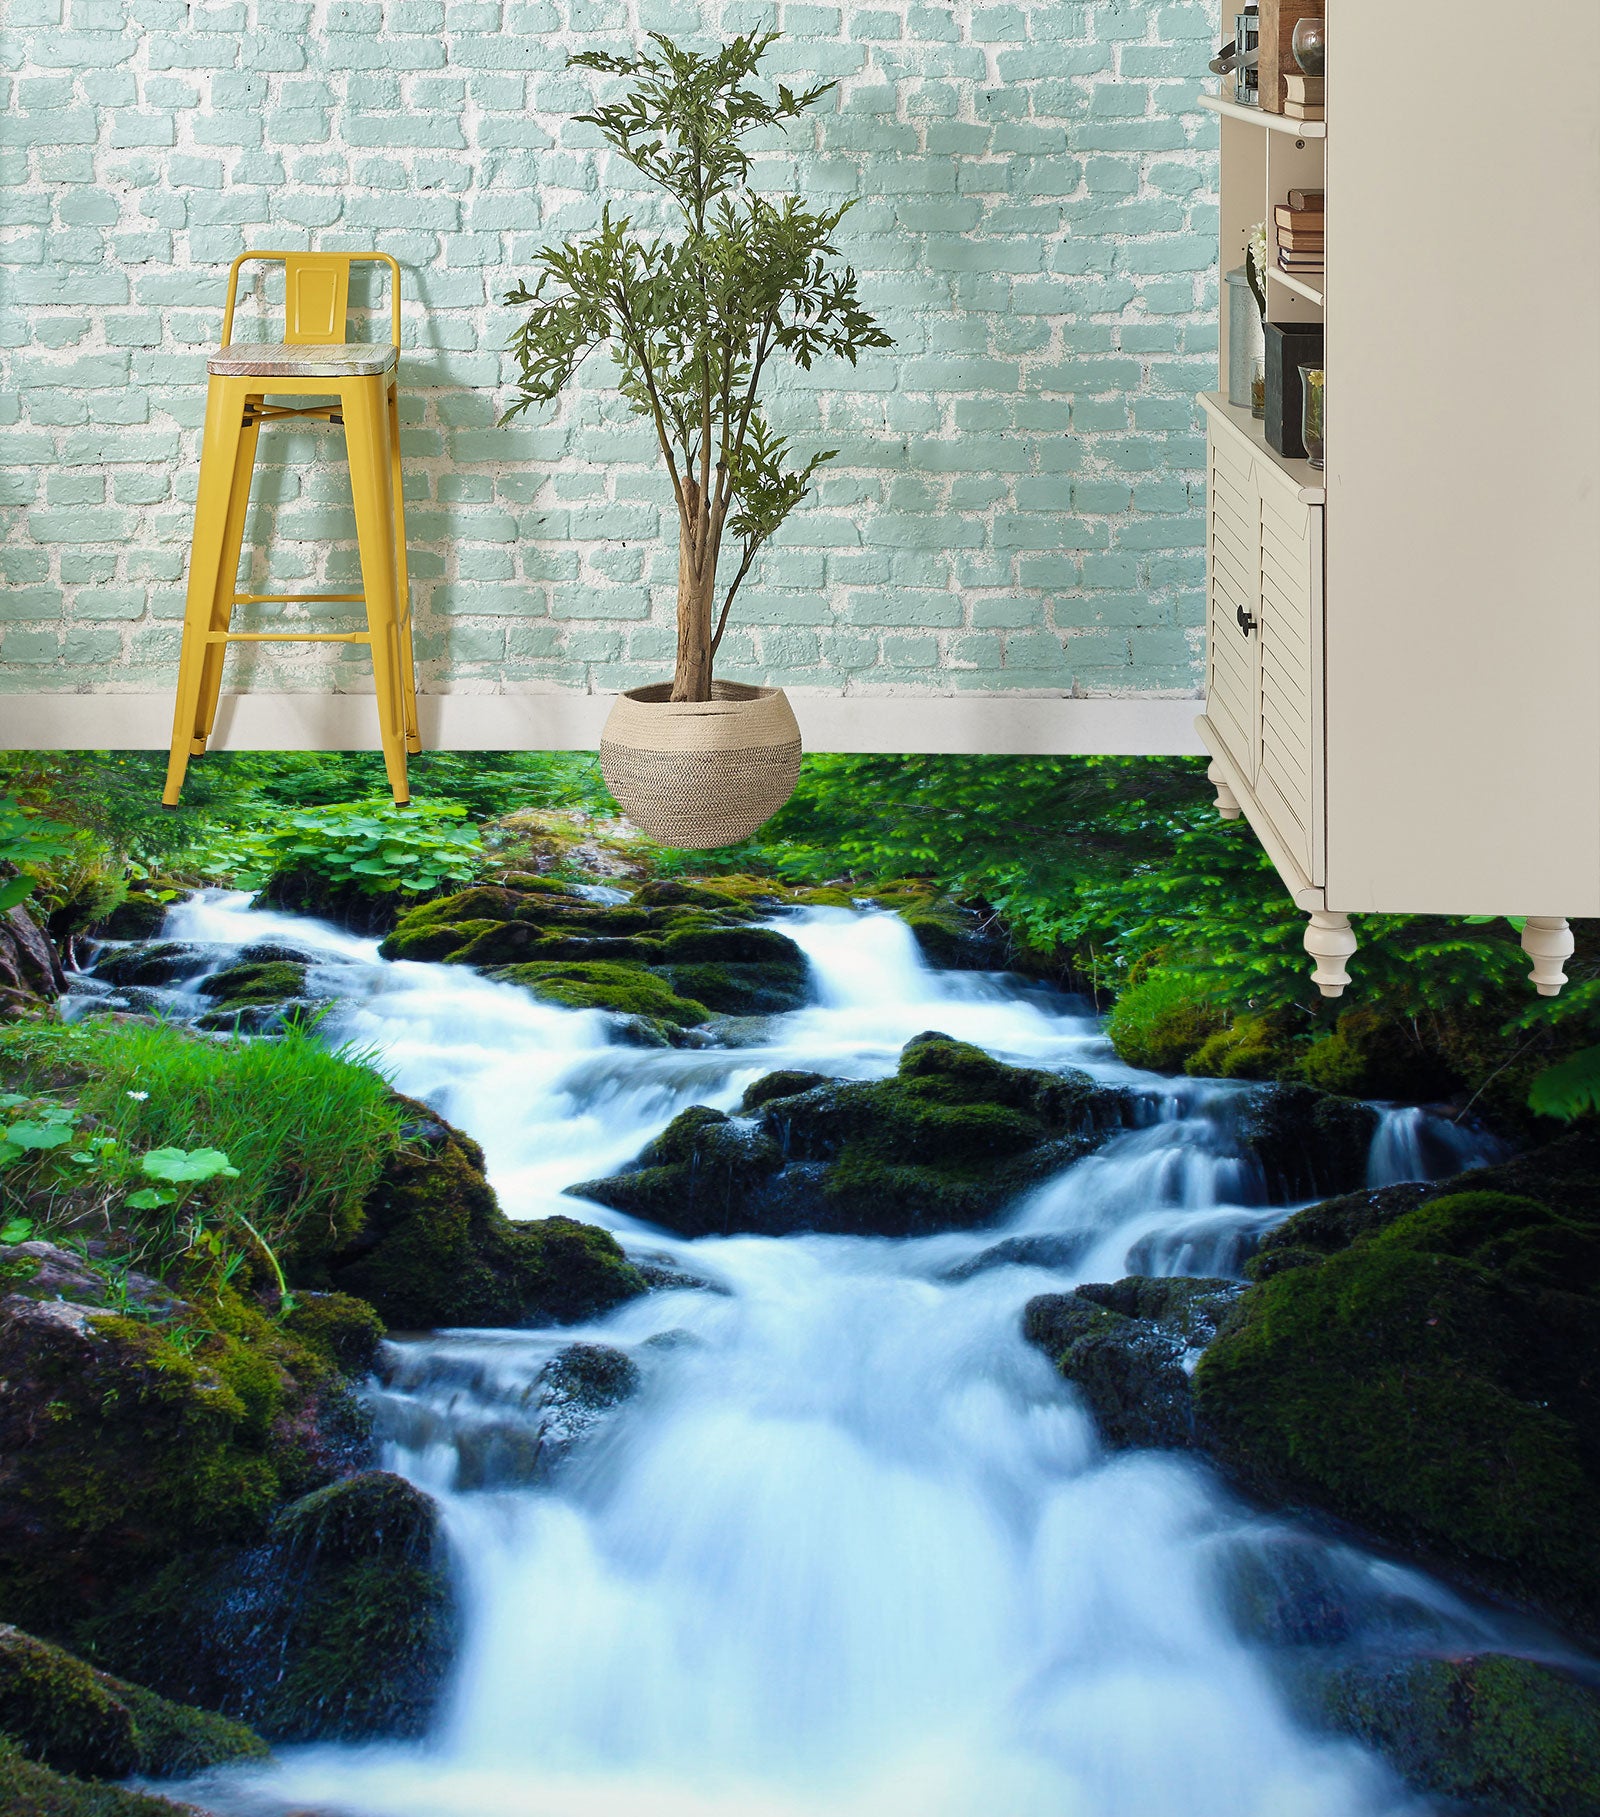 3D Rich White River 1037 Floor Mural  Wallpaper Murals Self-Adhesive Removable Print Epoxy